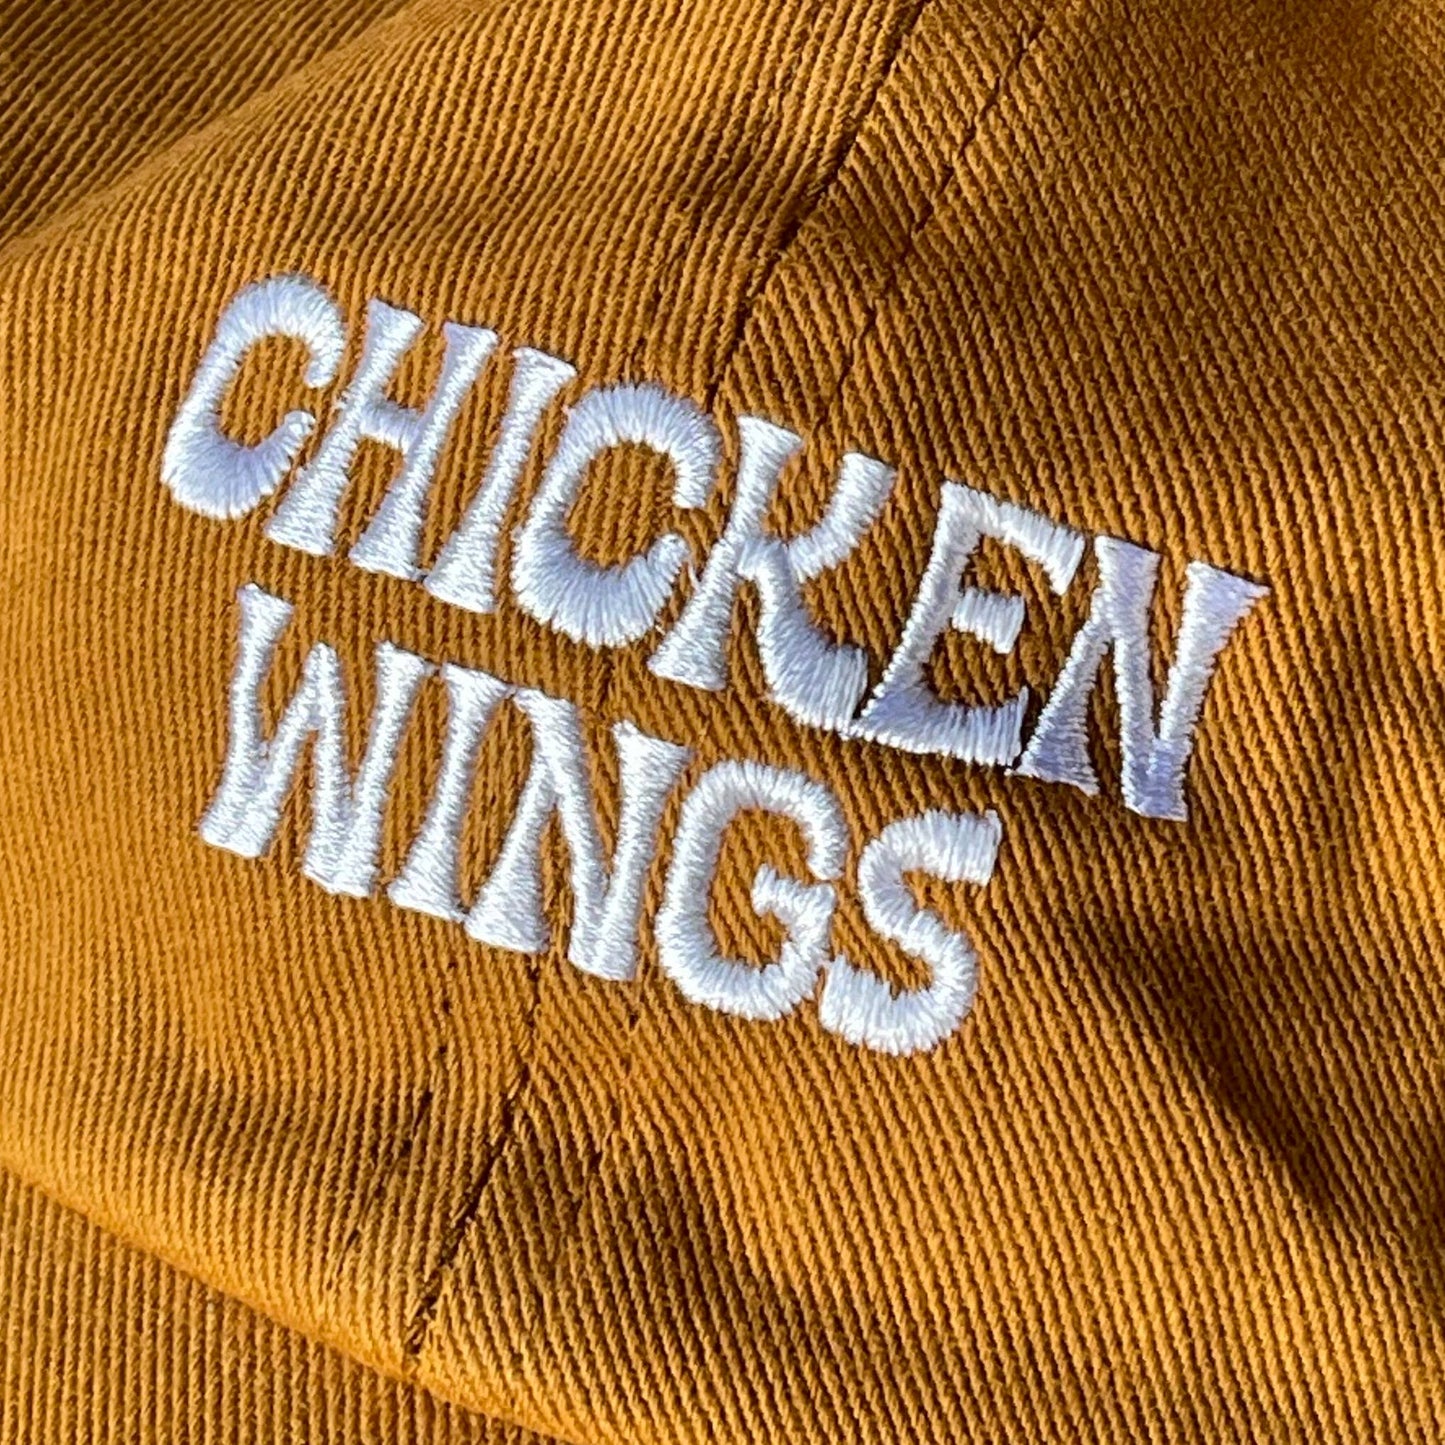 Close up of embroidered text that reads "chicken wings" 